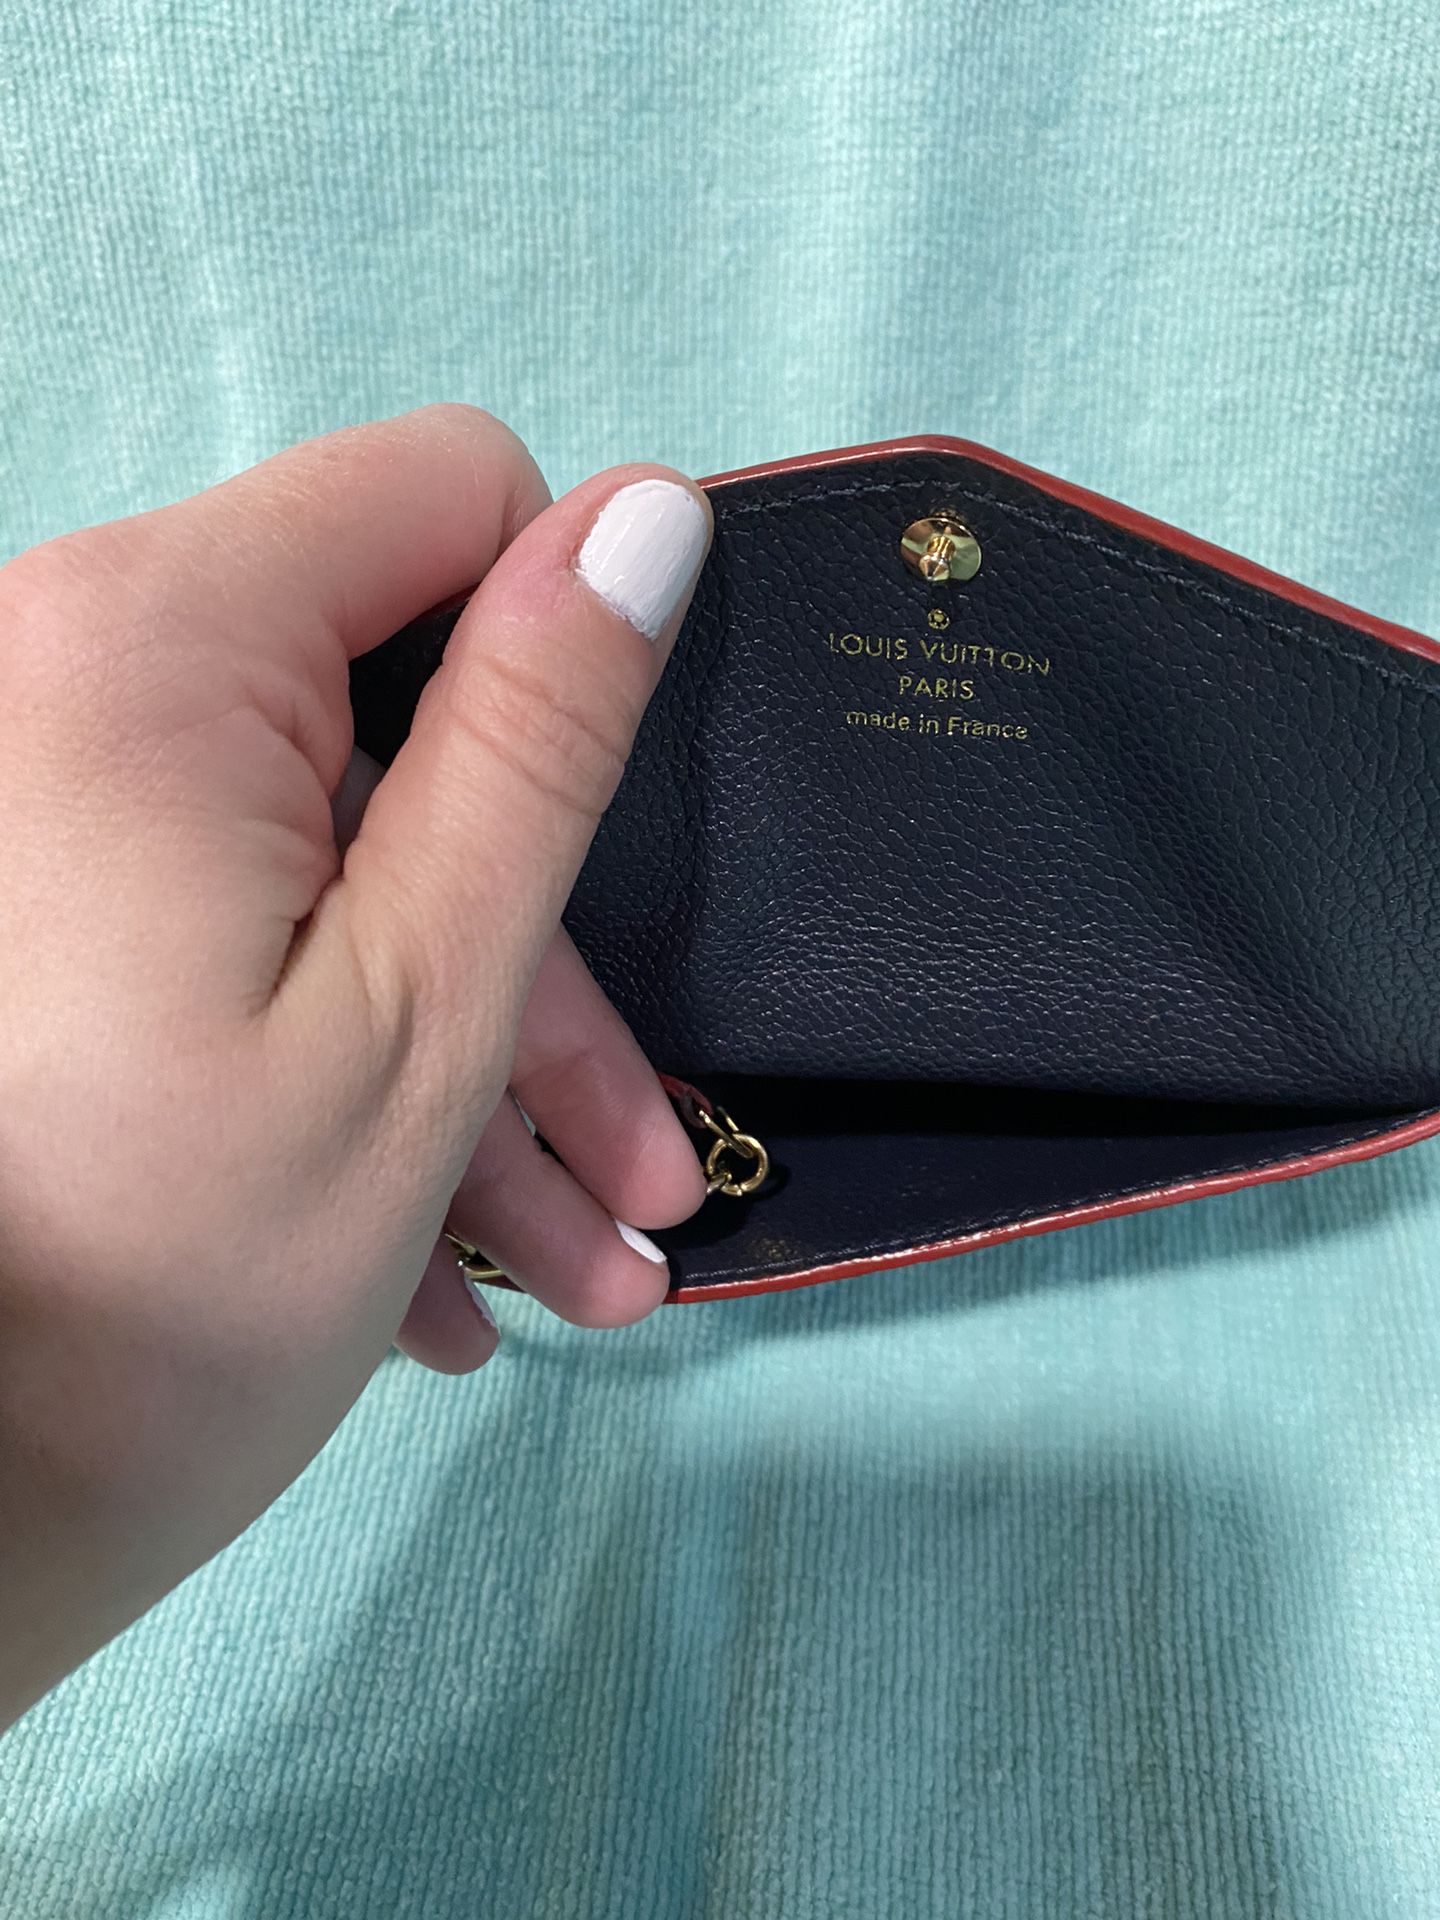 Louis Vuitton Change Purse for Sale in Cleveland, OH - OfferUp